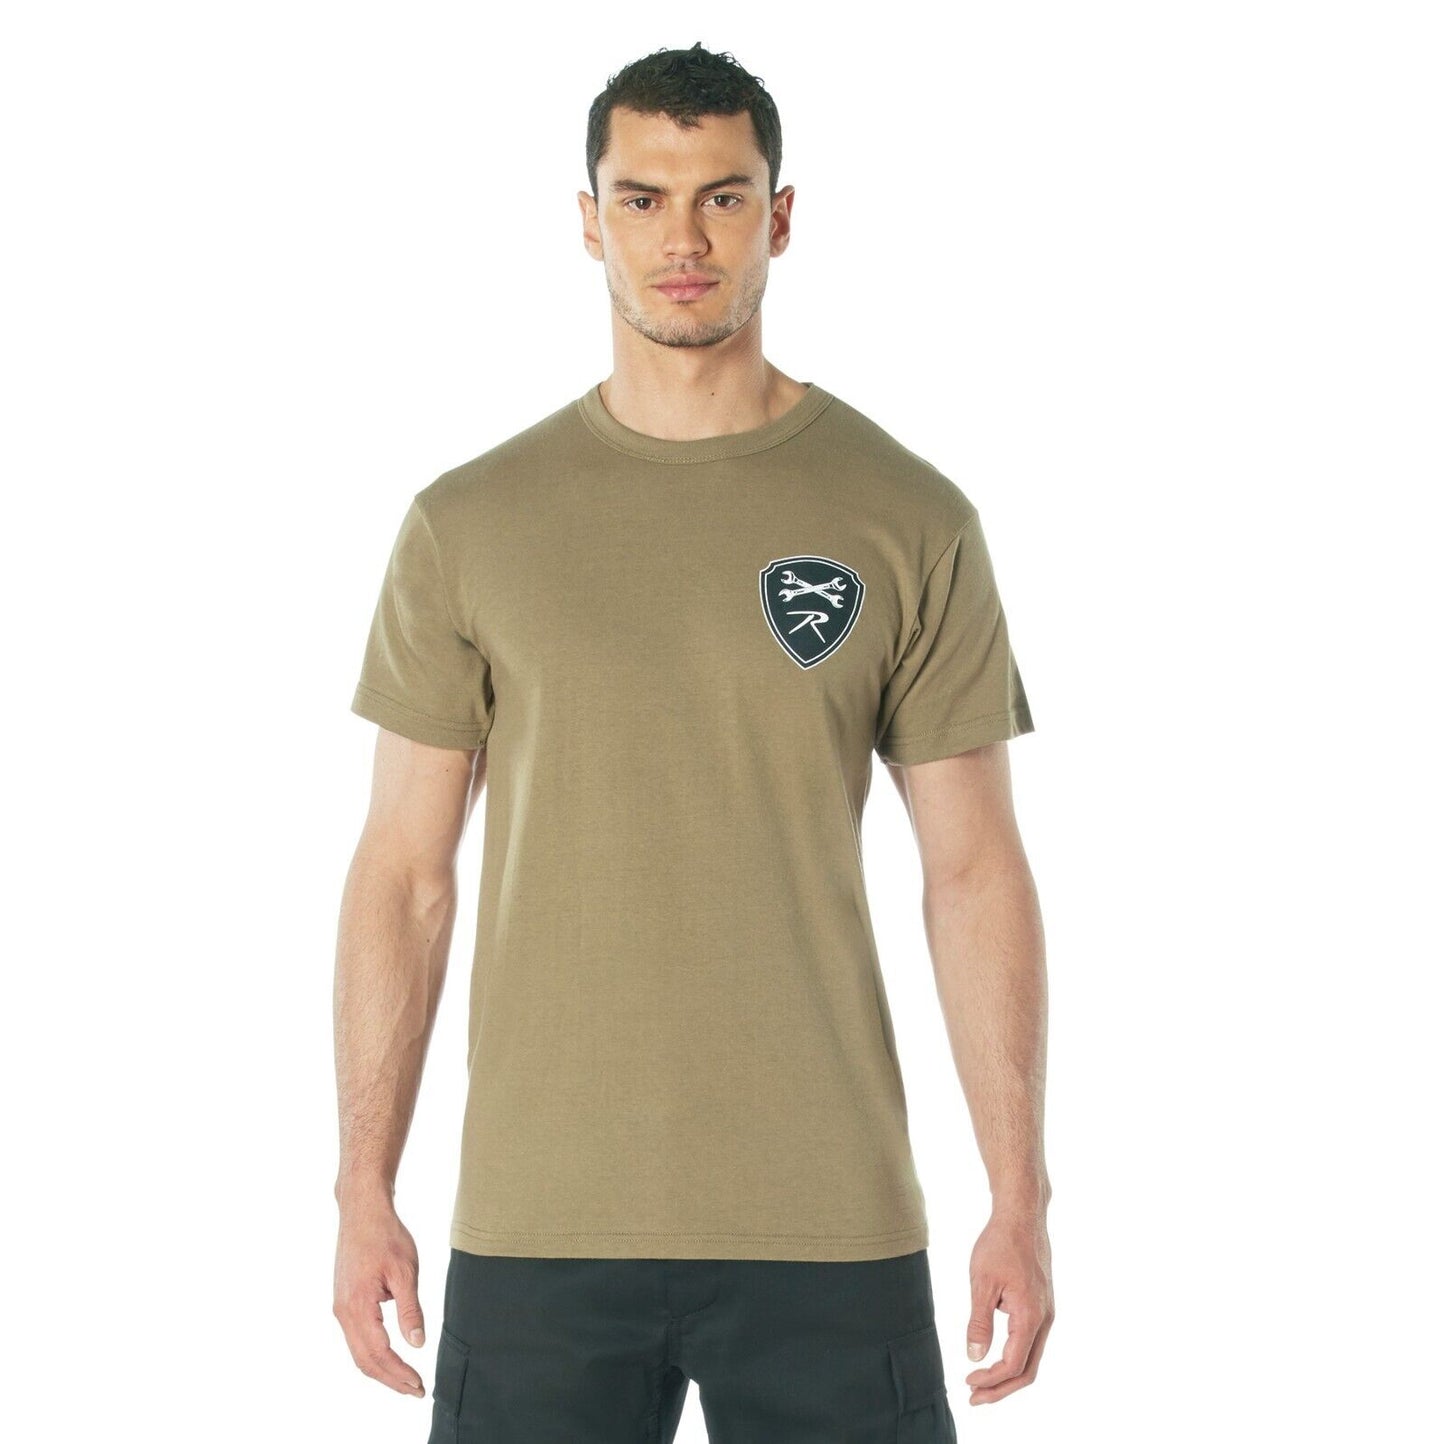 Rothco "Getting The Job Done T-Shirt" Casual Workwear